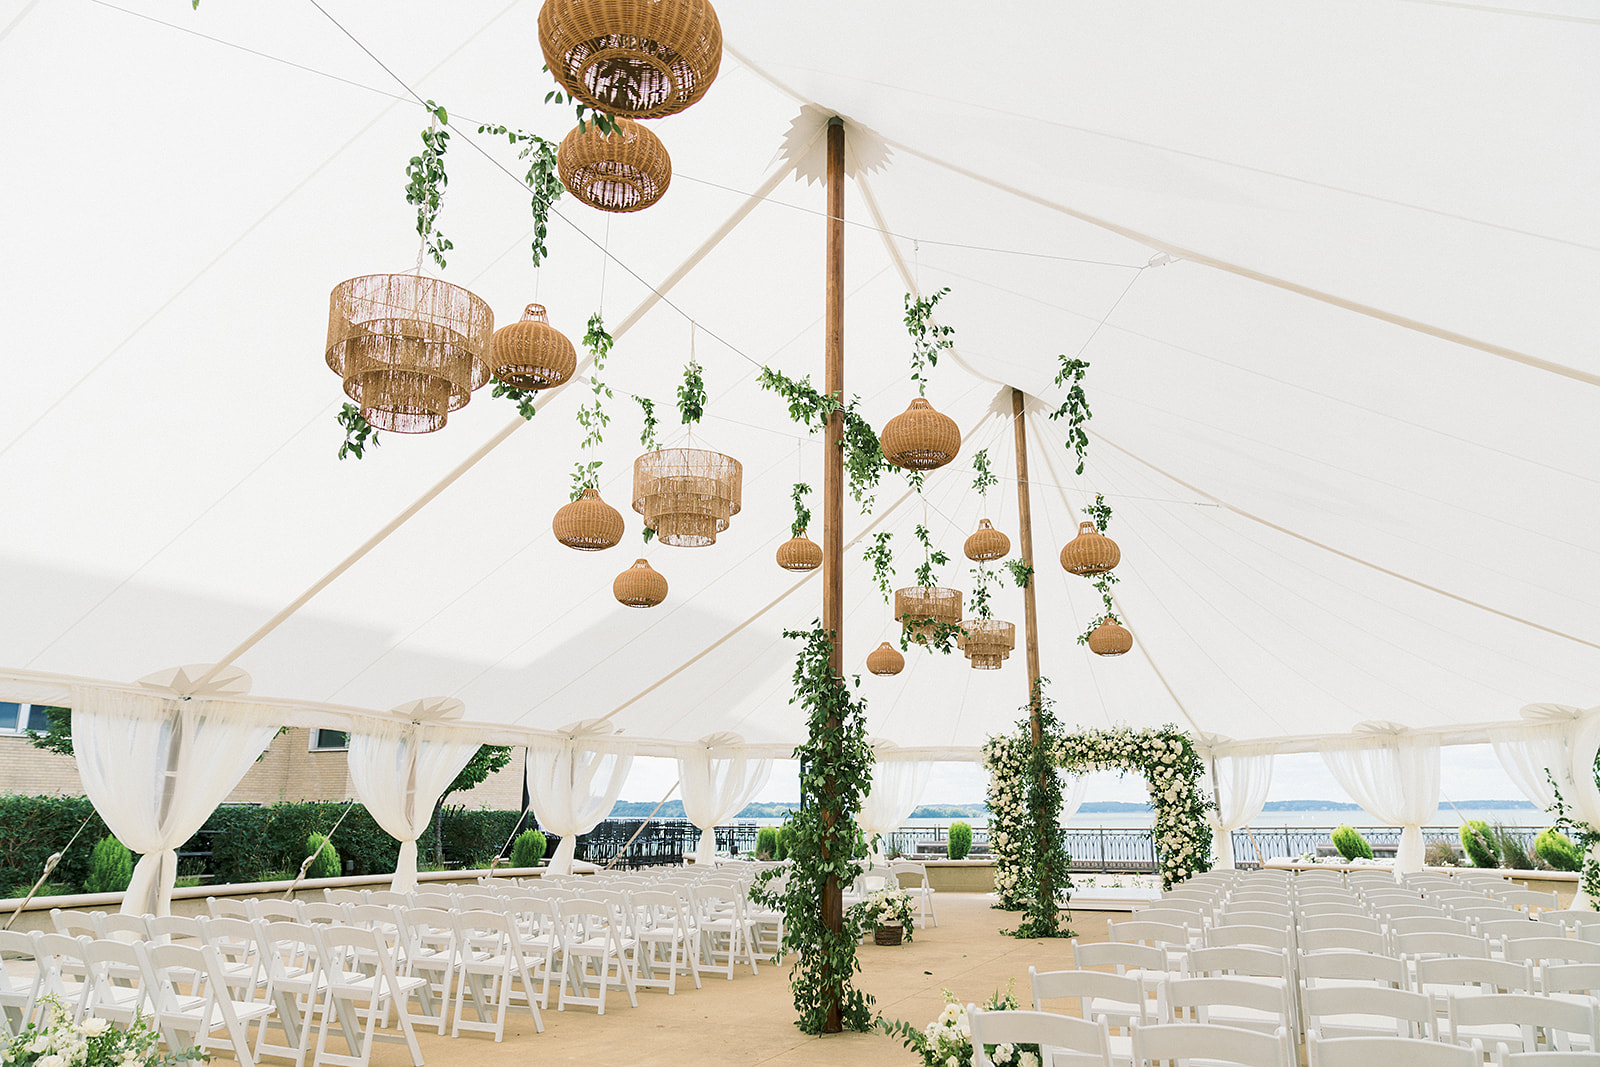 Chair rentals set up for a wedding ceremony under a sailcloth tent, decorated with hanging light fixtures and greenery.